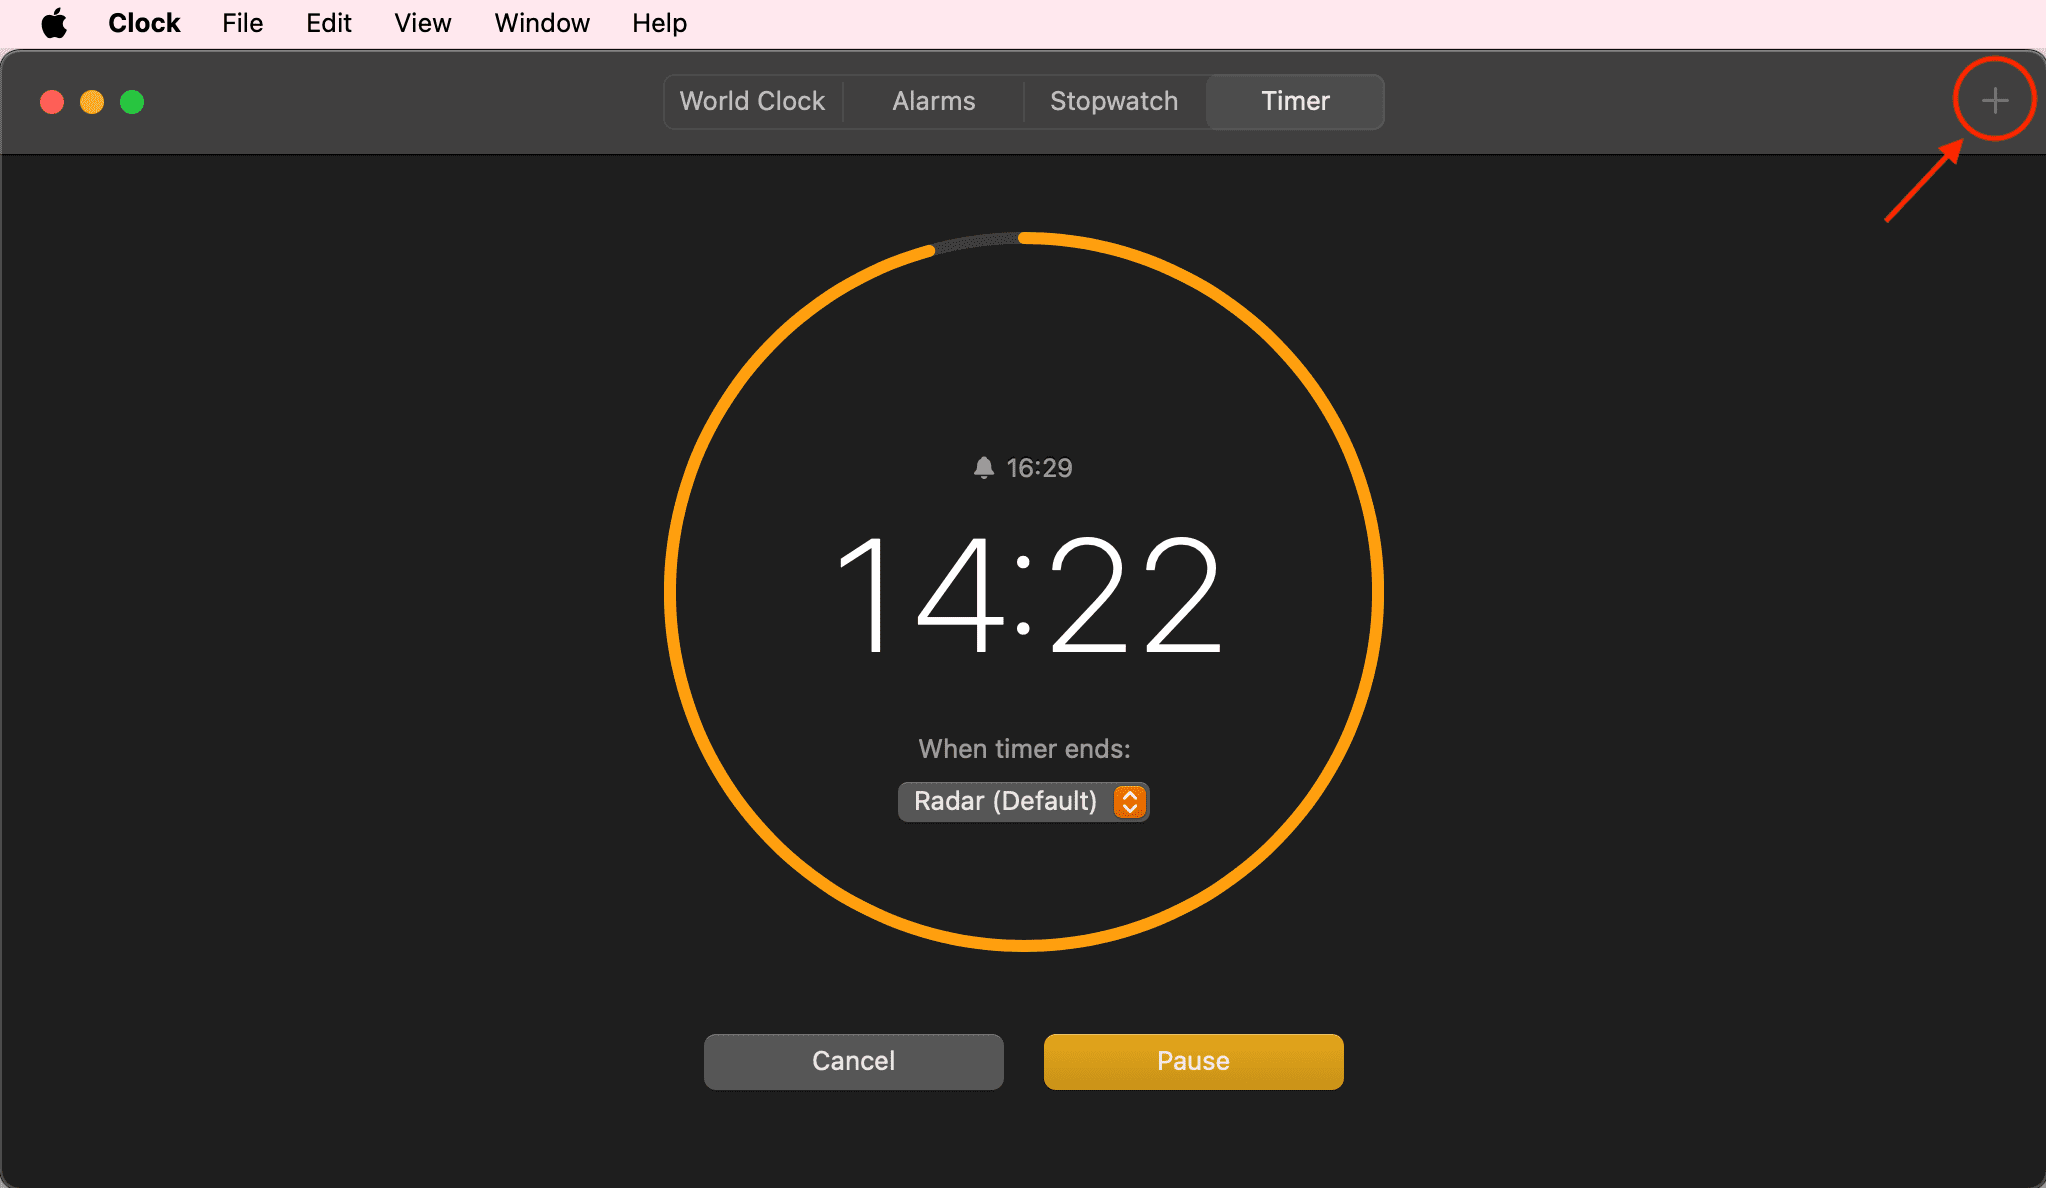 About multiple timers in Clock app on Mac